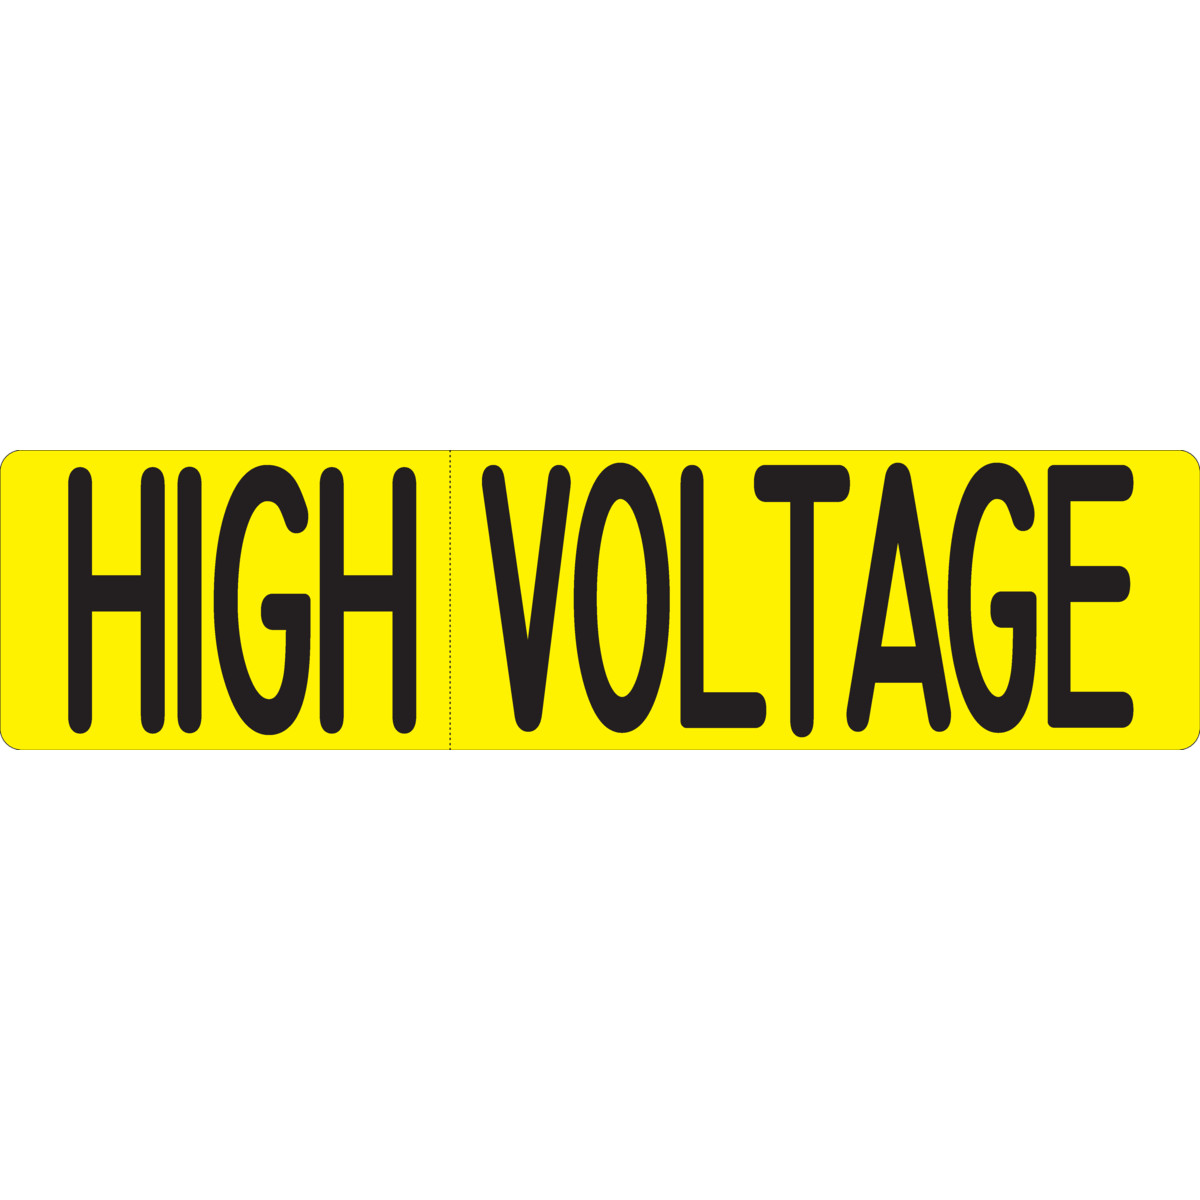 High Voltage Cross Arm Signs